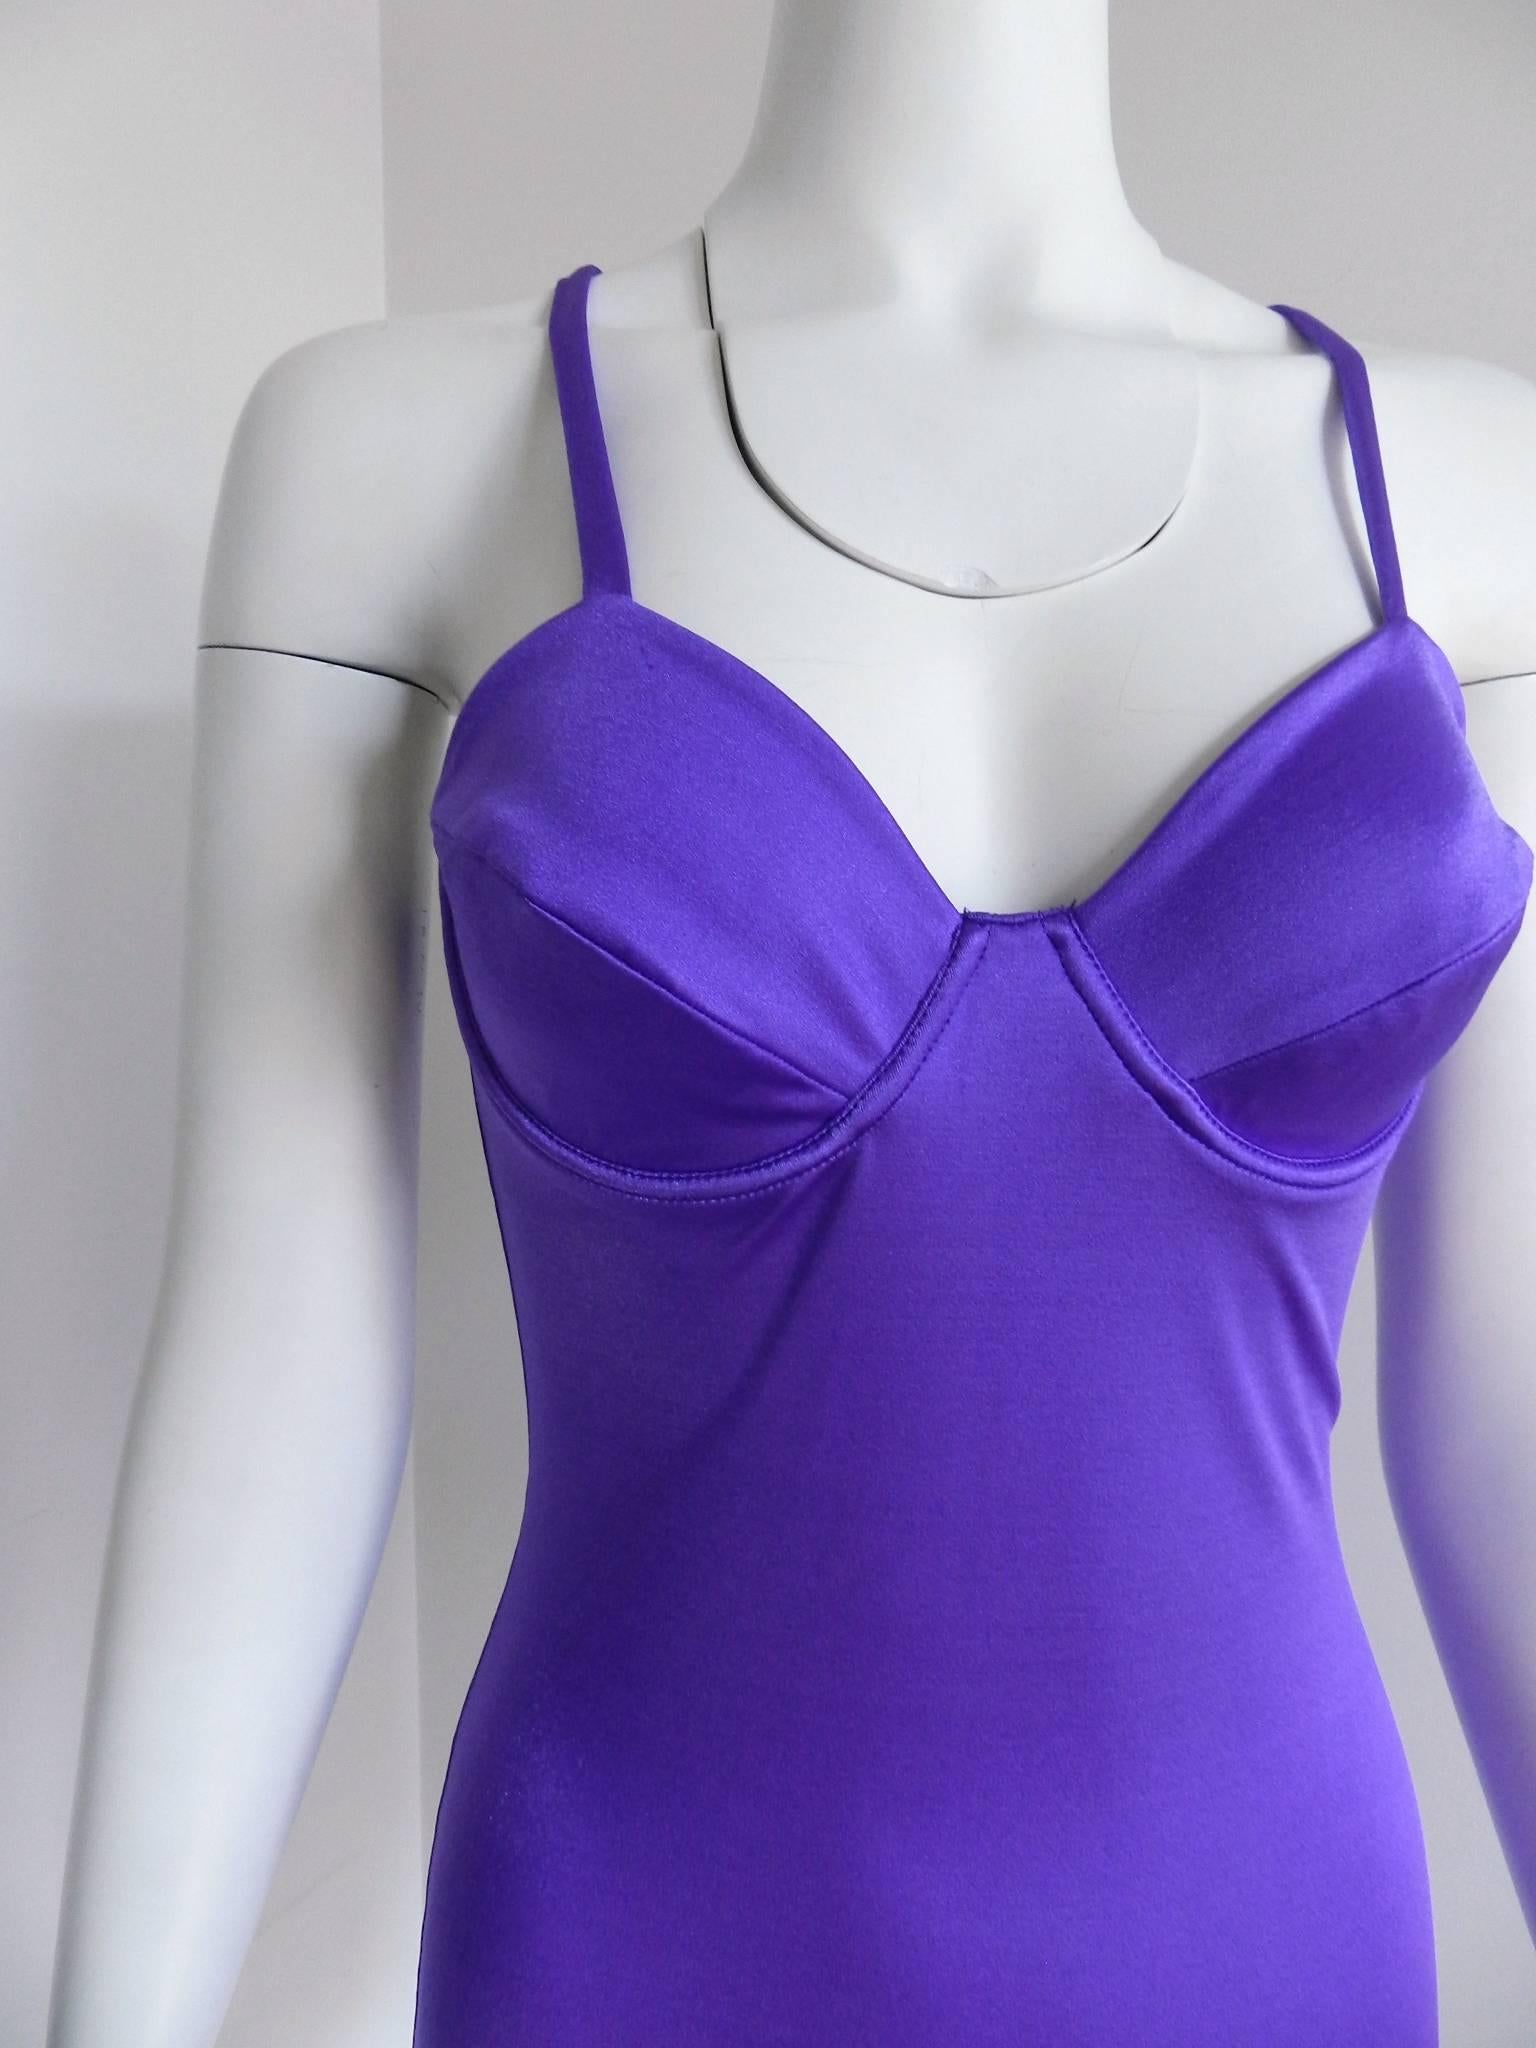 Versus by Gianni Versace Vintage Spring 1994 Electric purple Bodycon Dress.  Stretch spandex pull-over tube dress with sheen and under wired bra. Tag dated Spring 1994 collection. Excellent vintage condition. Tagged size IT 42 (USA 6). Can fit USA 4